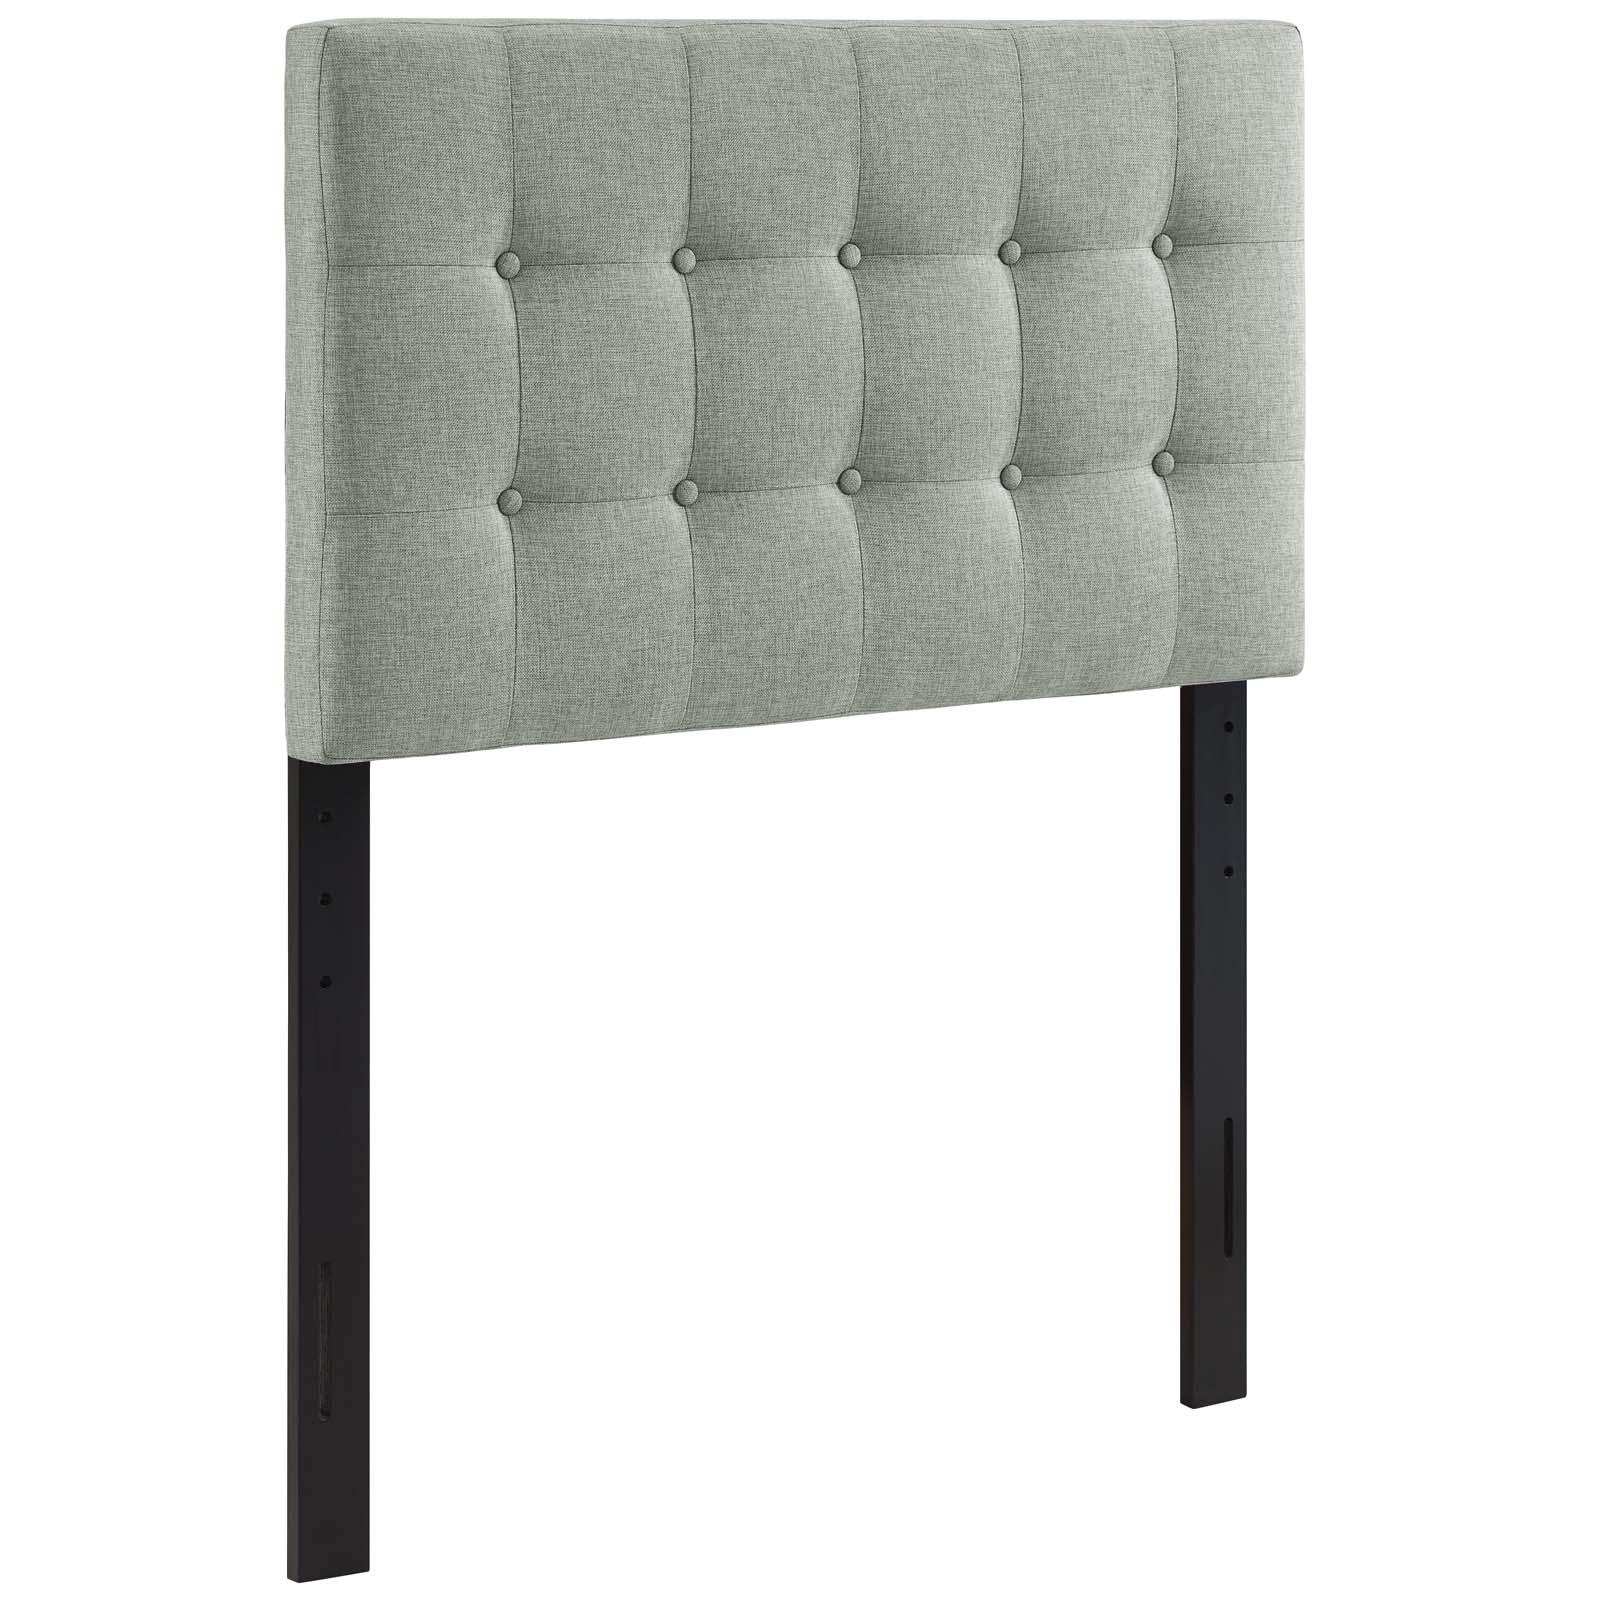 Details about   Modway Emily Twin Vinyl Panel Headboard in Black 